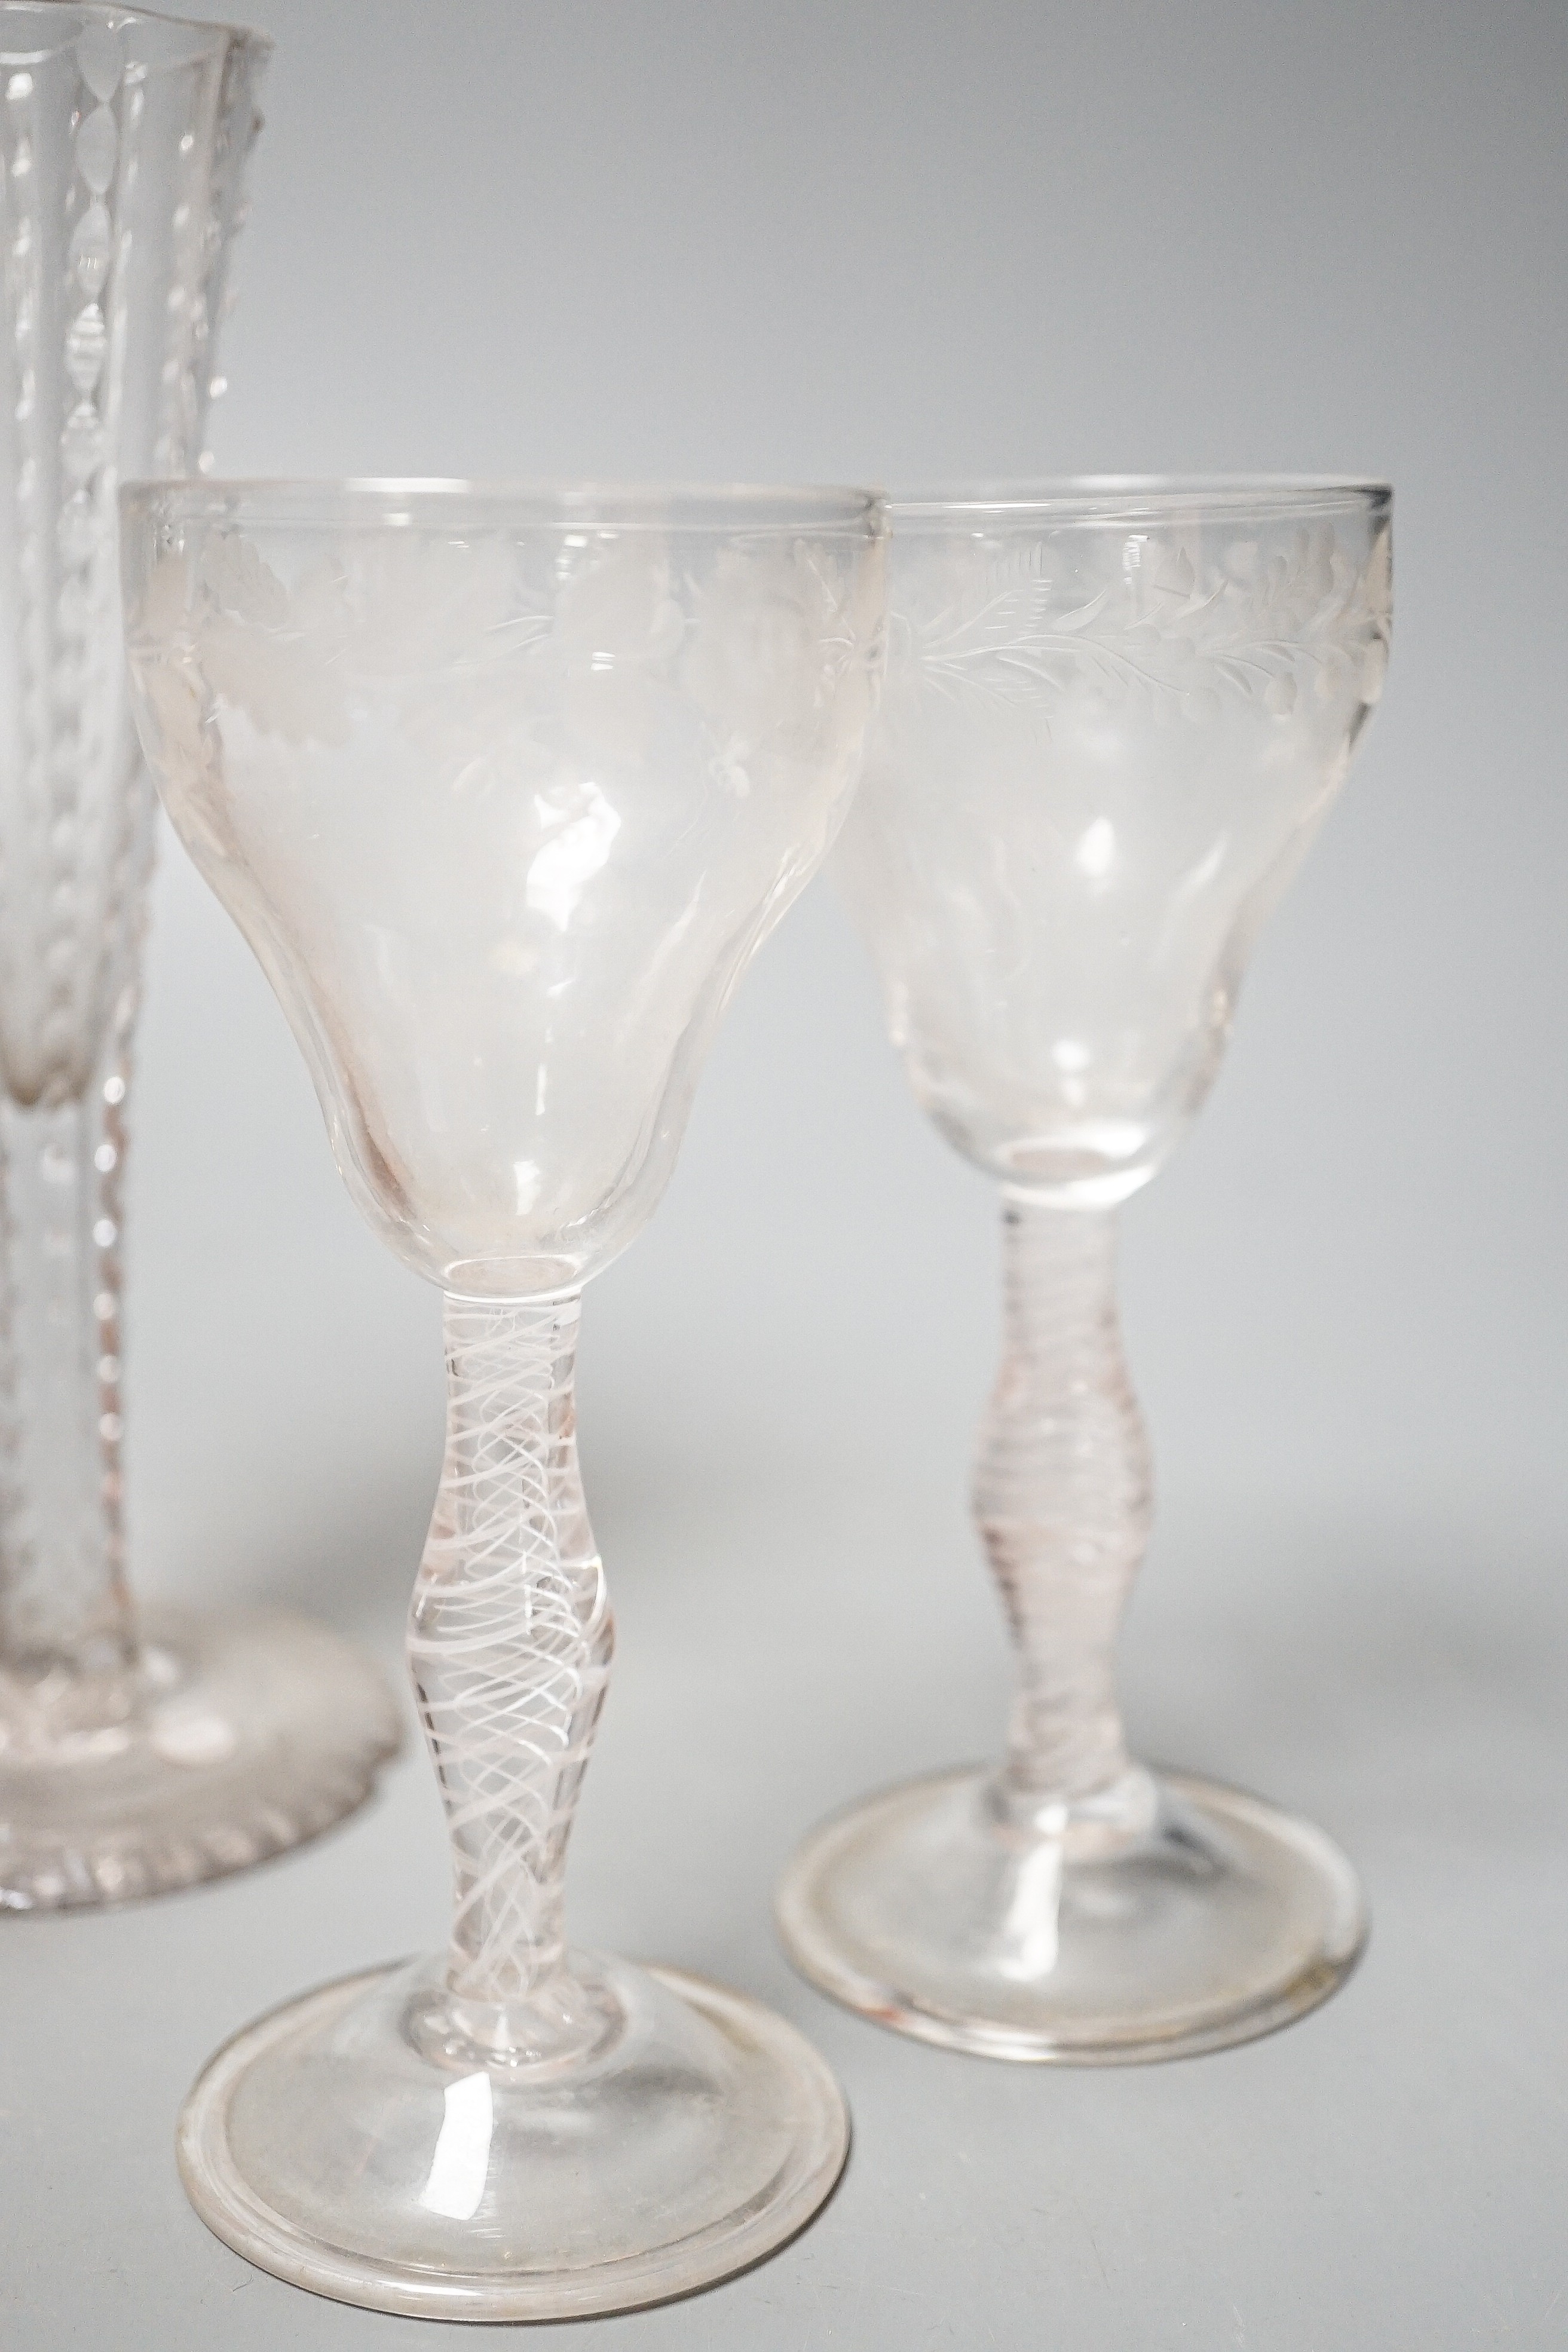 A pair of opaque twist cordial glasses with floral engraved bowls, 14cm and sundry glassware